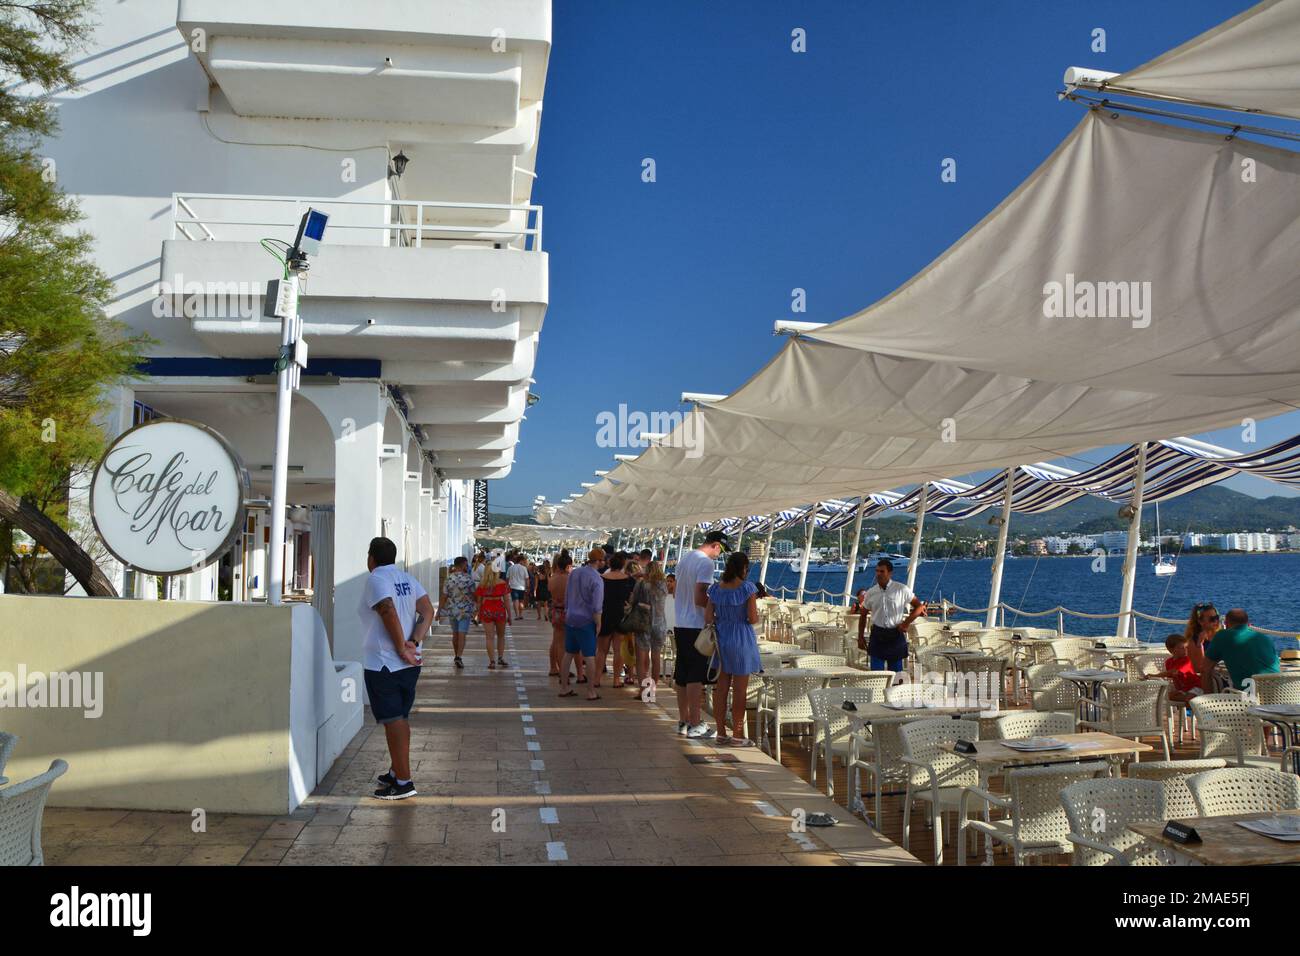 Ibiza, Spain - July 12, 2017: Cafe del Mar in San Antonio de Portmany on Ibiza island. Cafe del Mar is a famous seaside bar with the best views of sun Stock Photo